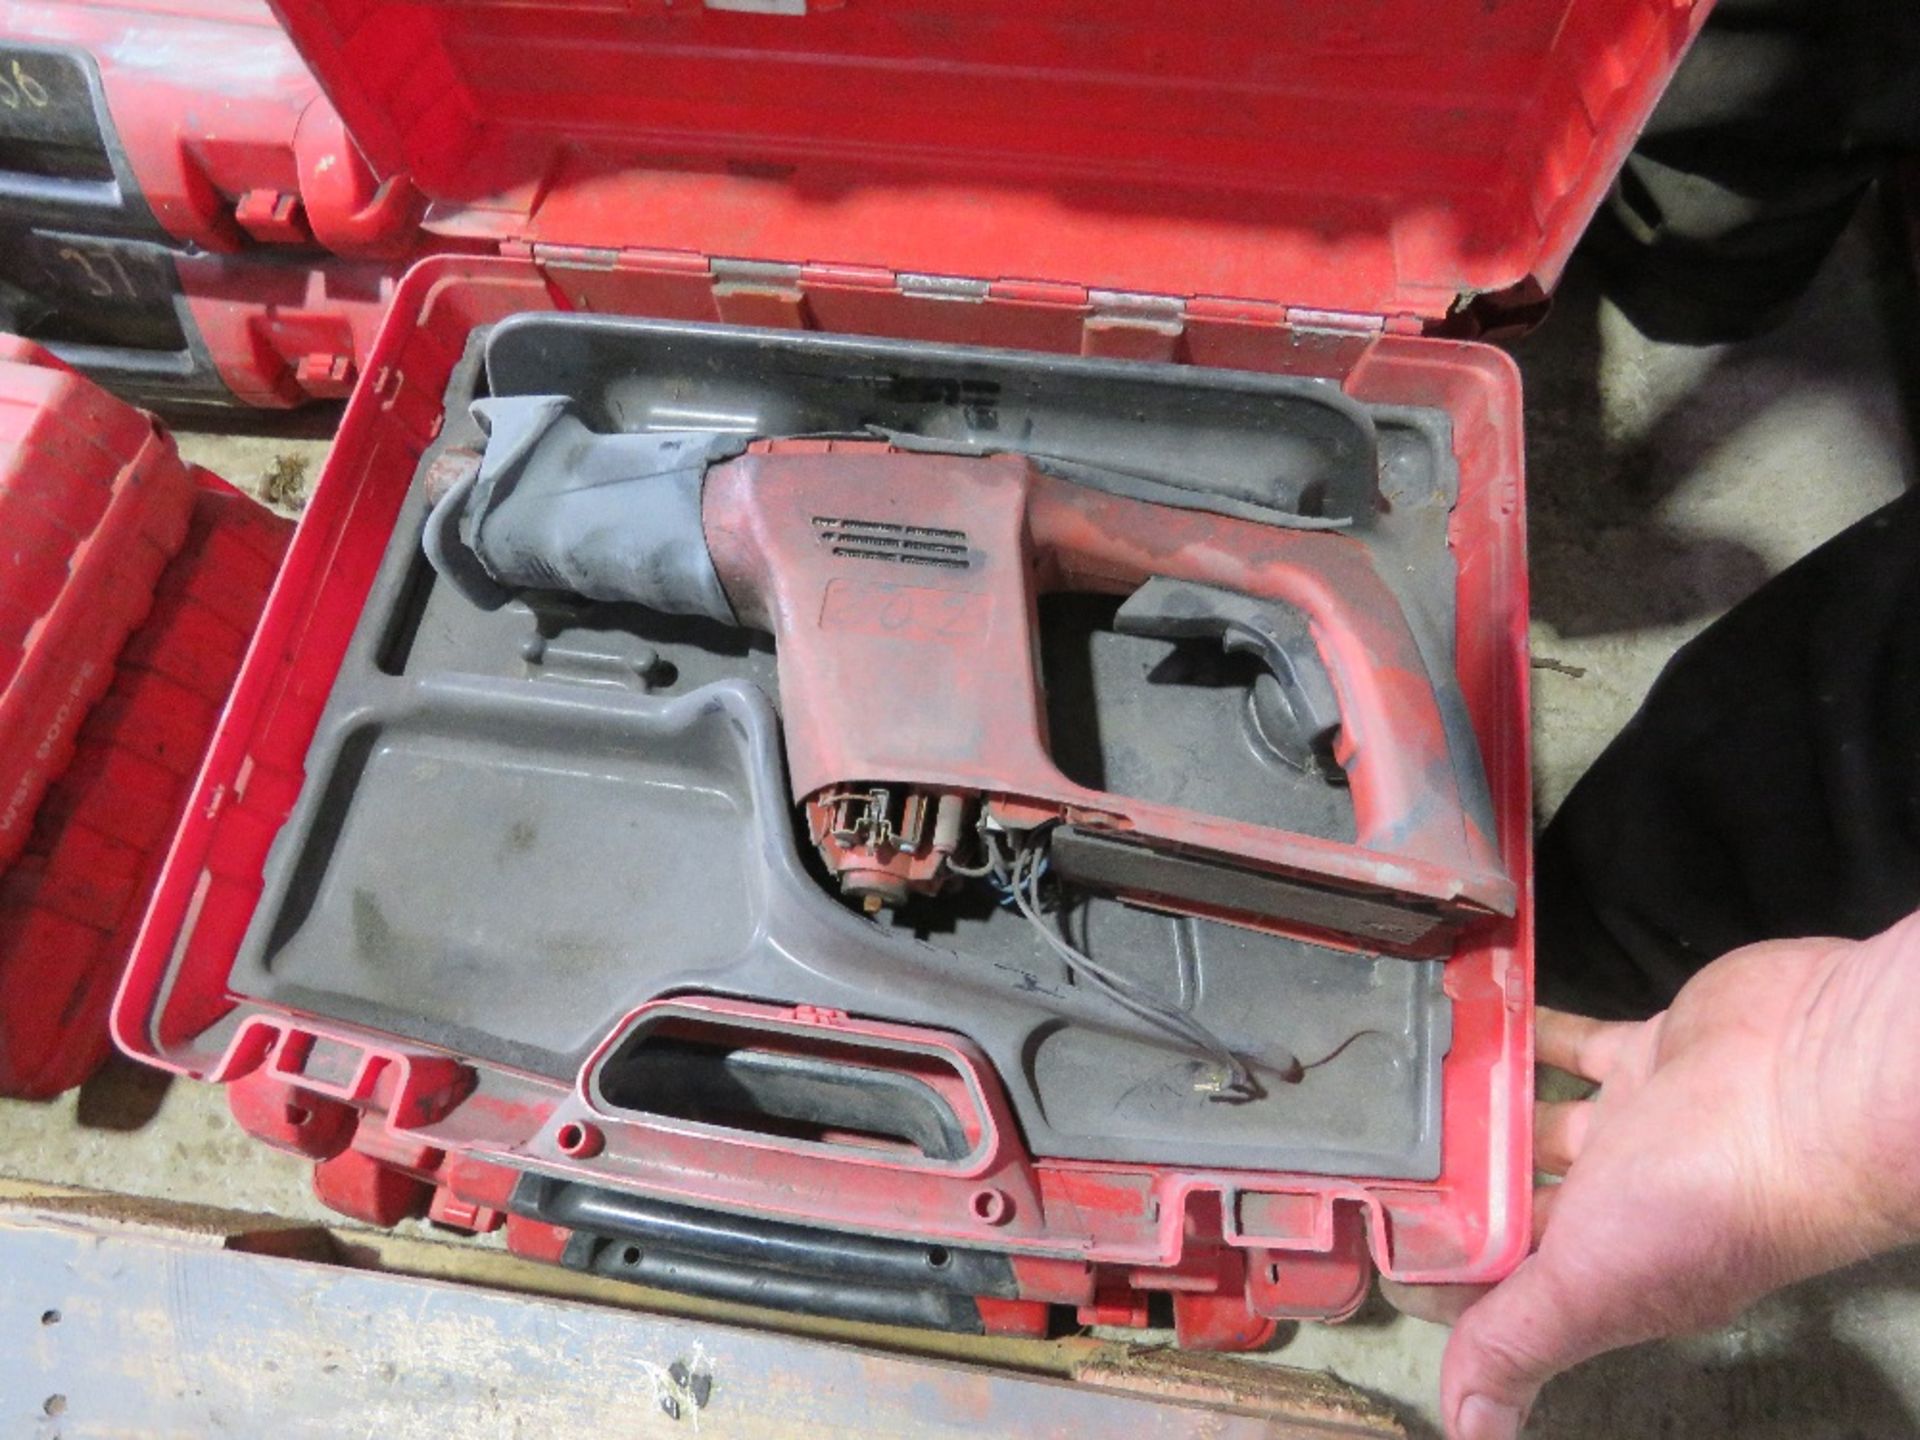 4 X HILTI 110VOLT POWERED RECIPROCATING SAWS (ONE IS INCOMPLETE). - Image 2 of 4